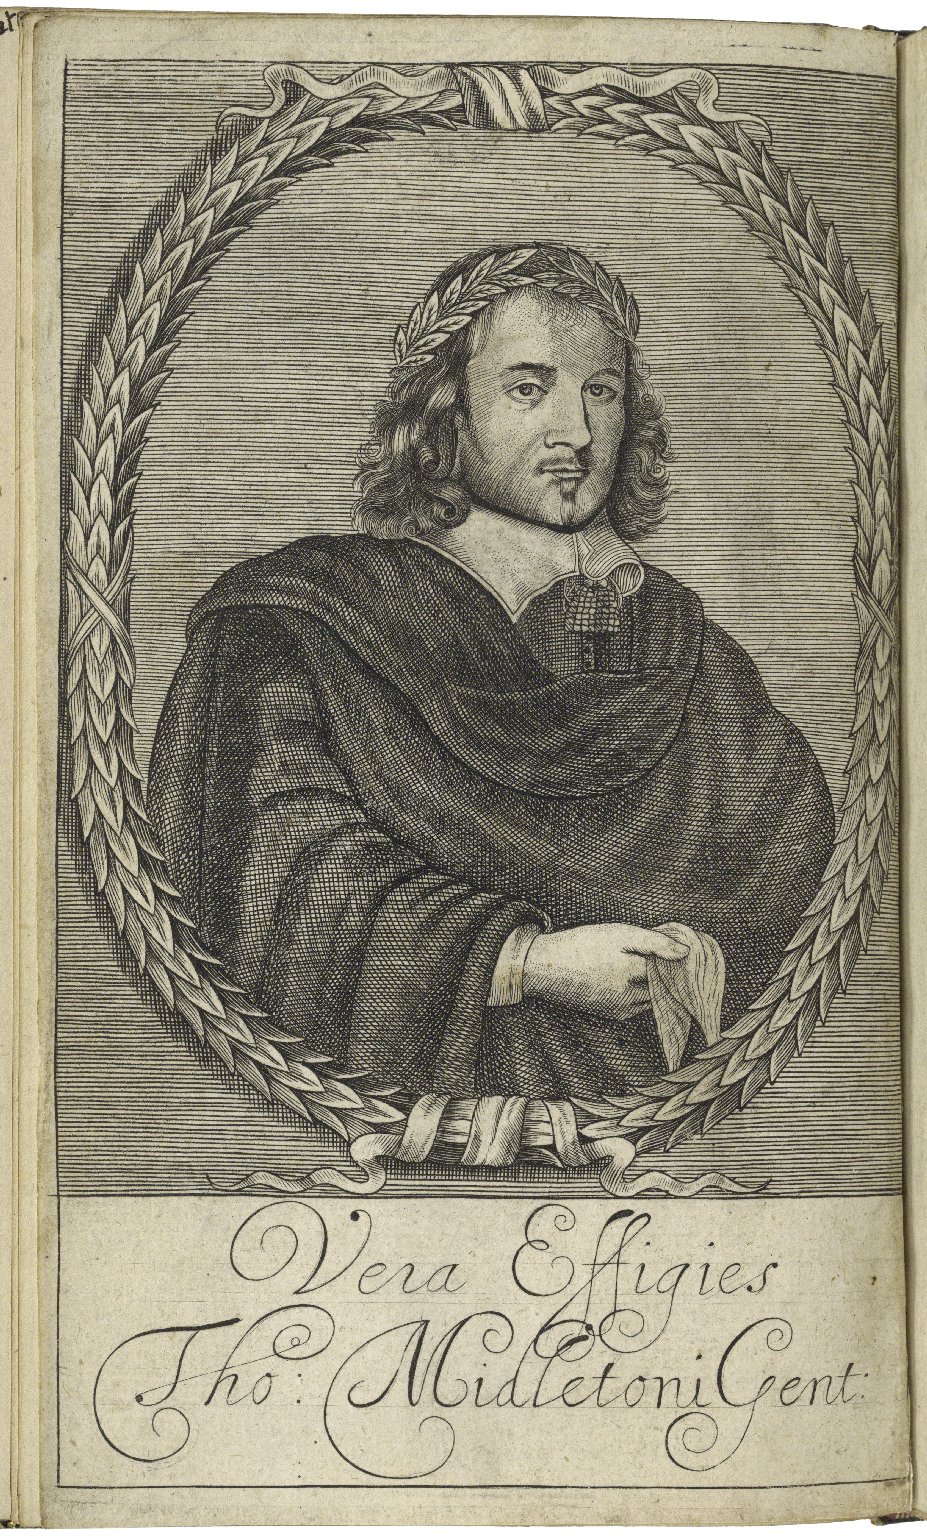 Portrait of Thomas Middleton from the frontispiece to No wit, help like a vvoman, 1657. Image courtesy of LUNA at the Folger Shakespeare Library